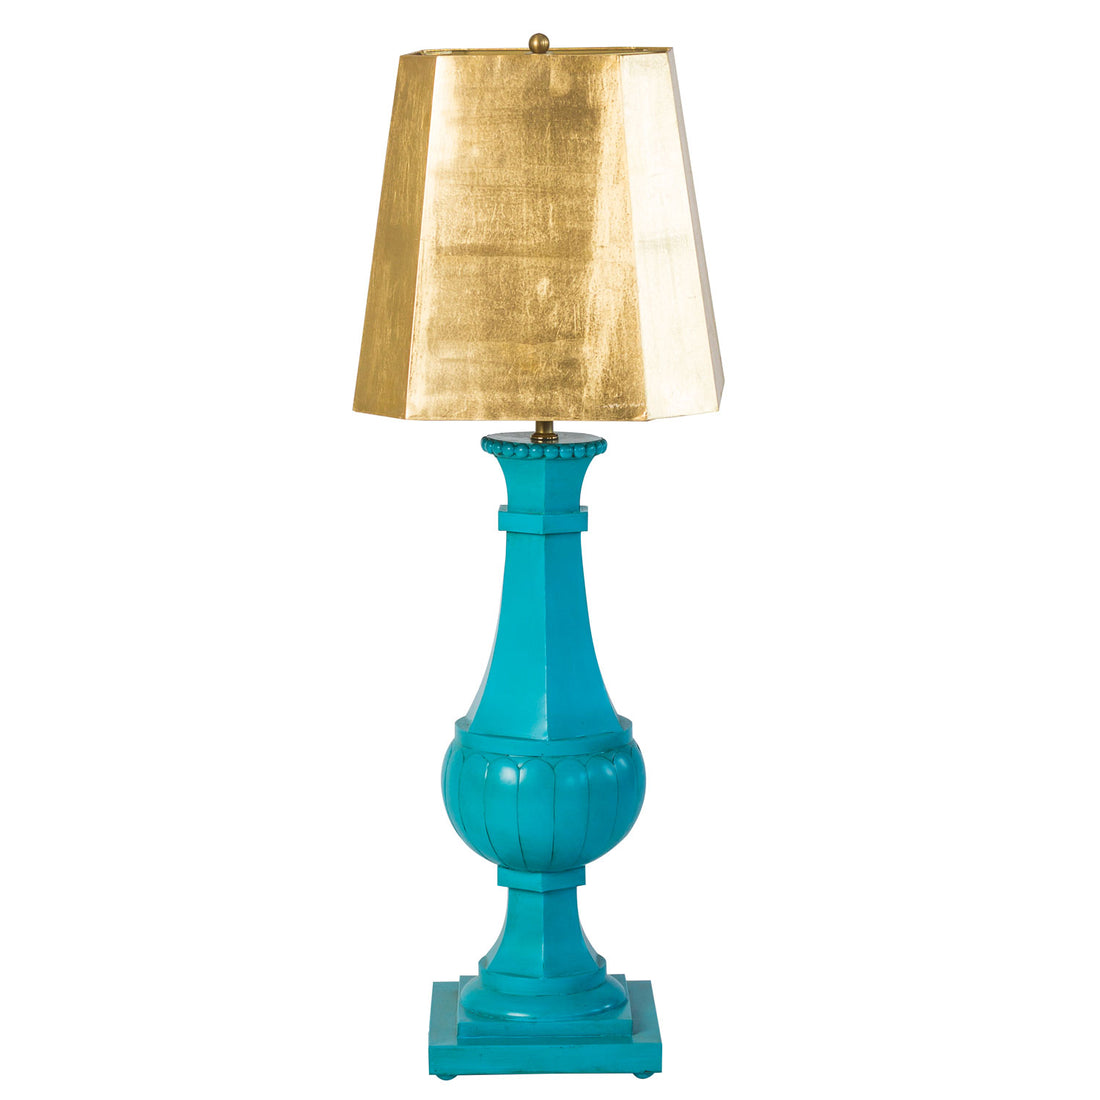 tall tole lamp in bright blue with gold leafed shade, Jeannie Light